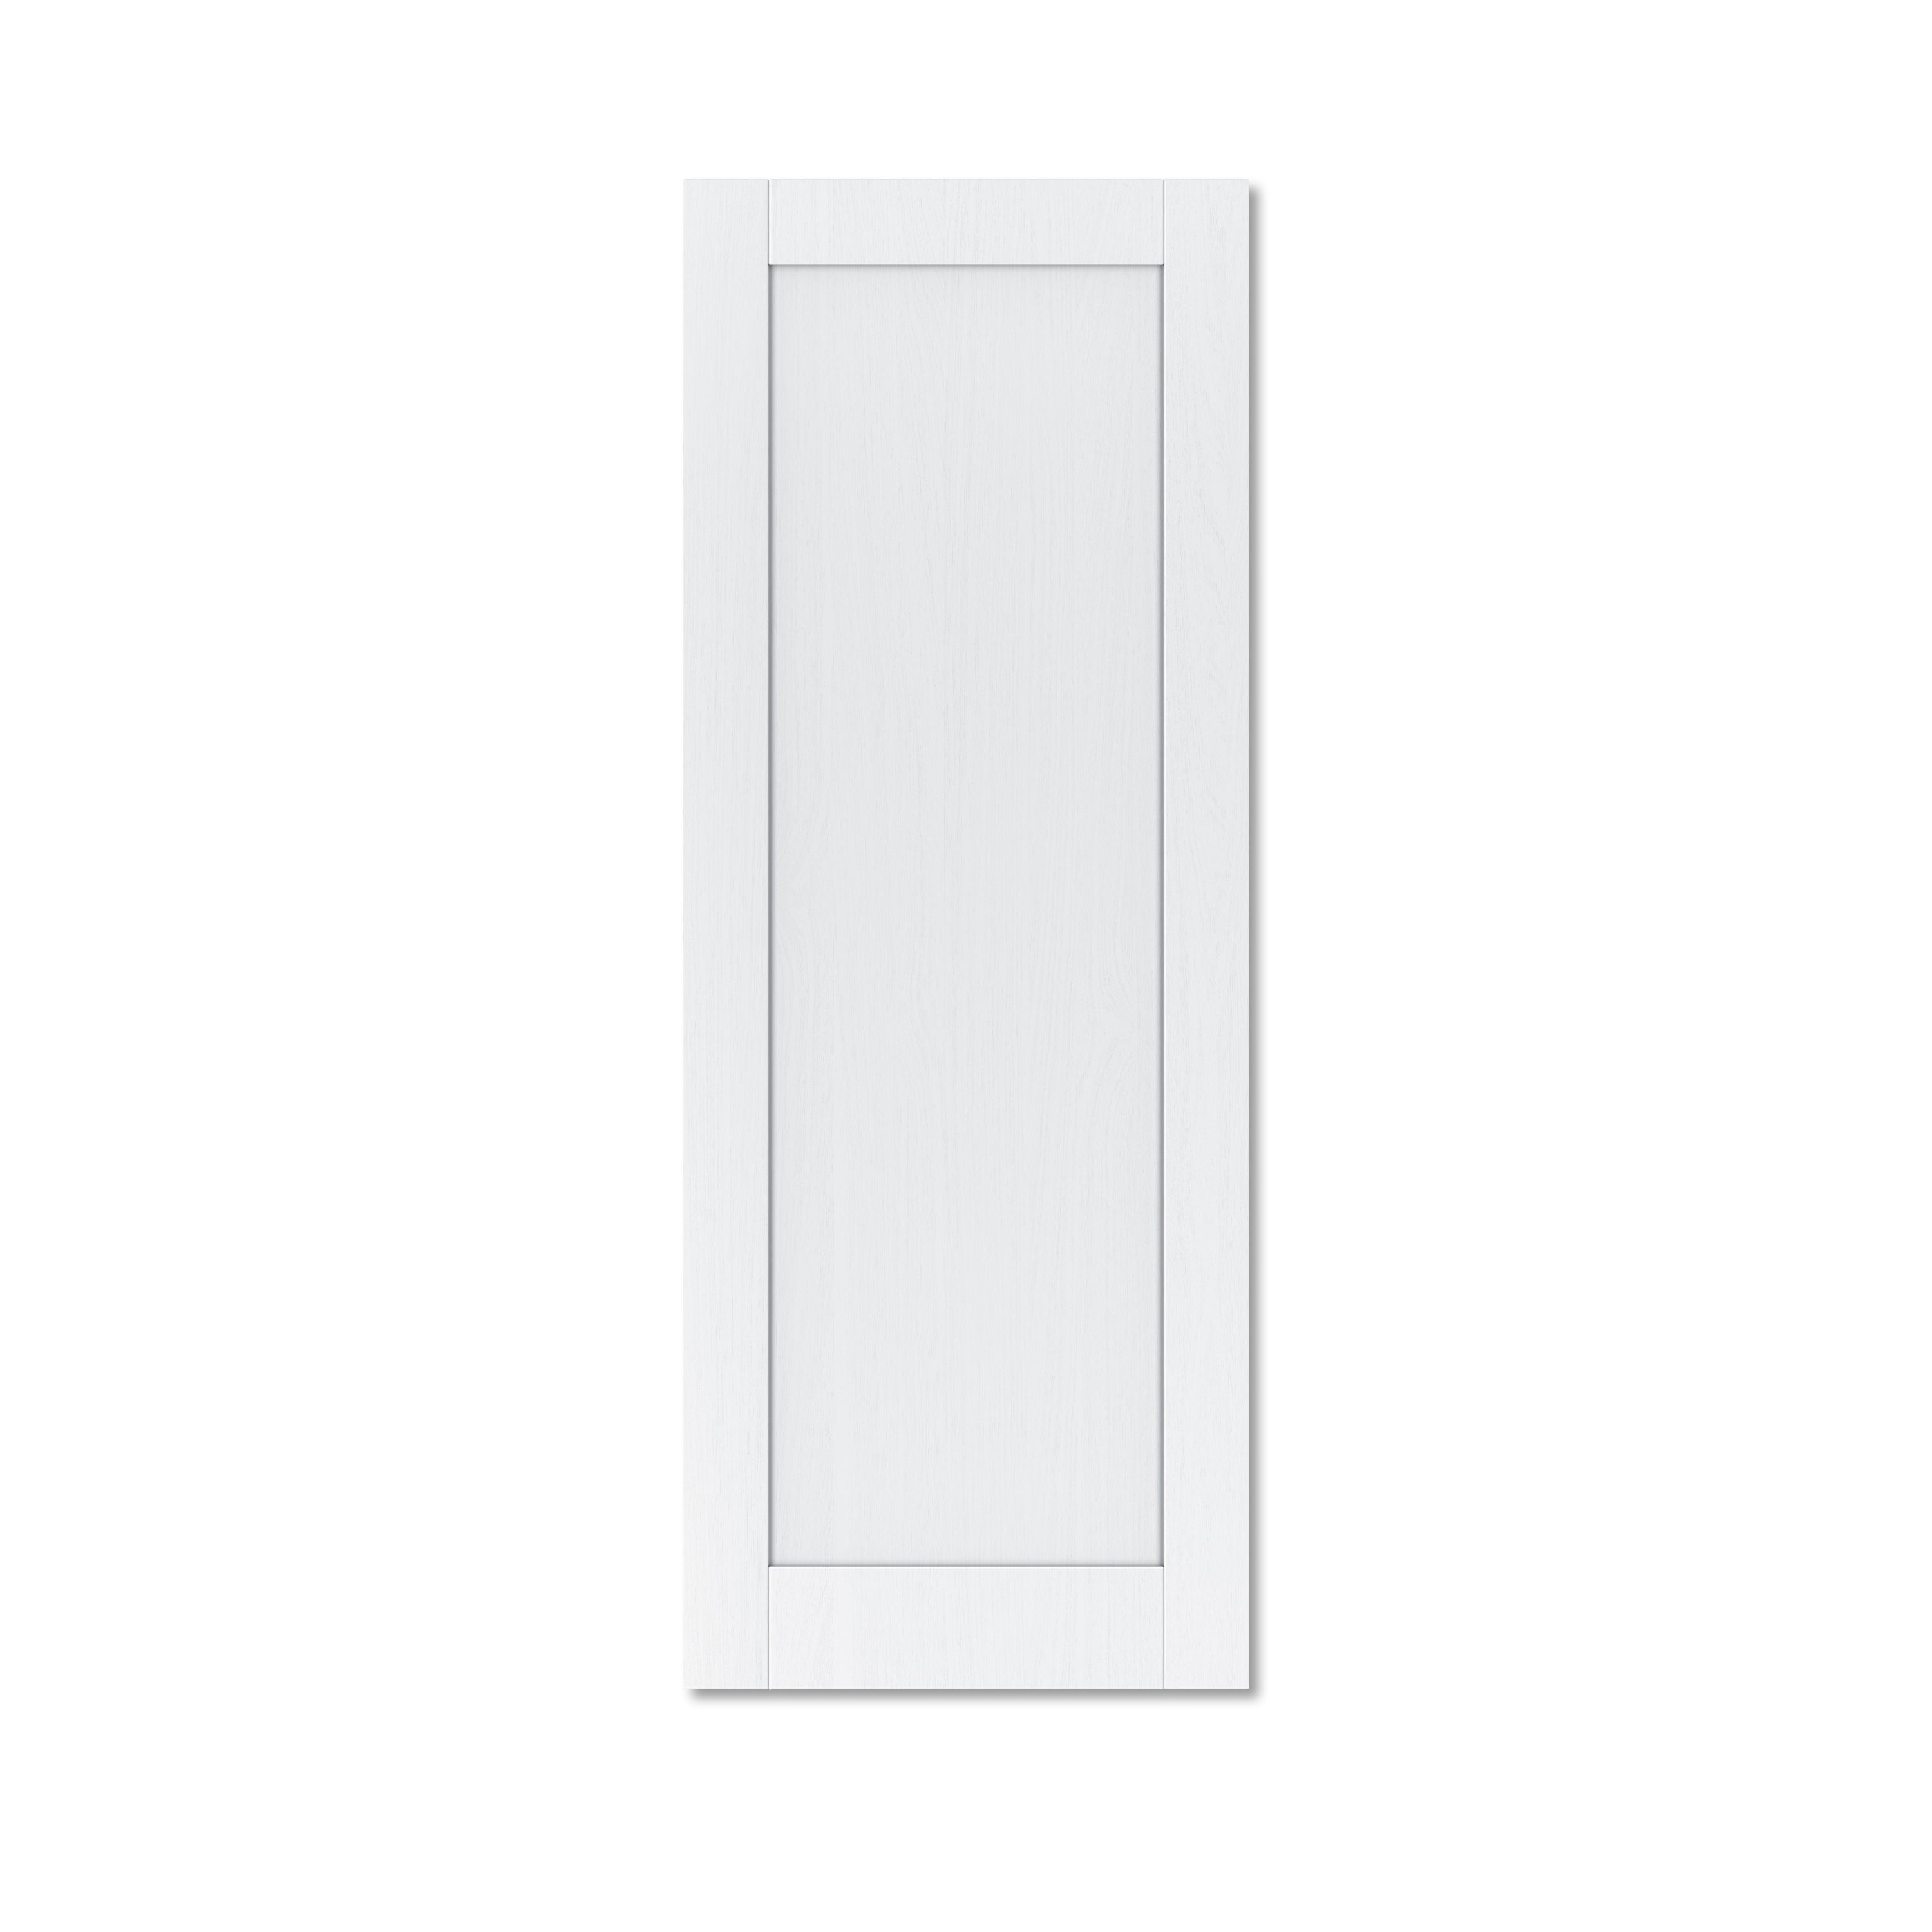 Ark Design Solid Wood Panel Door Slab with/without Prehung Kit, White